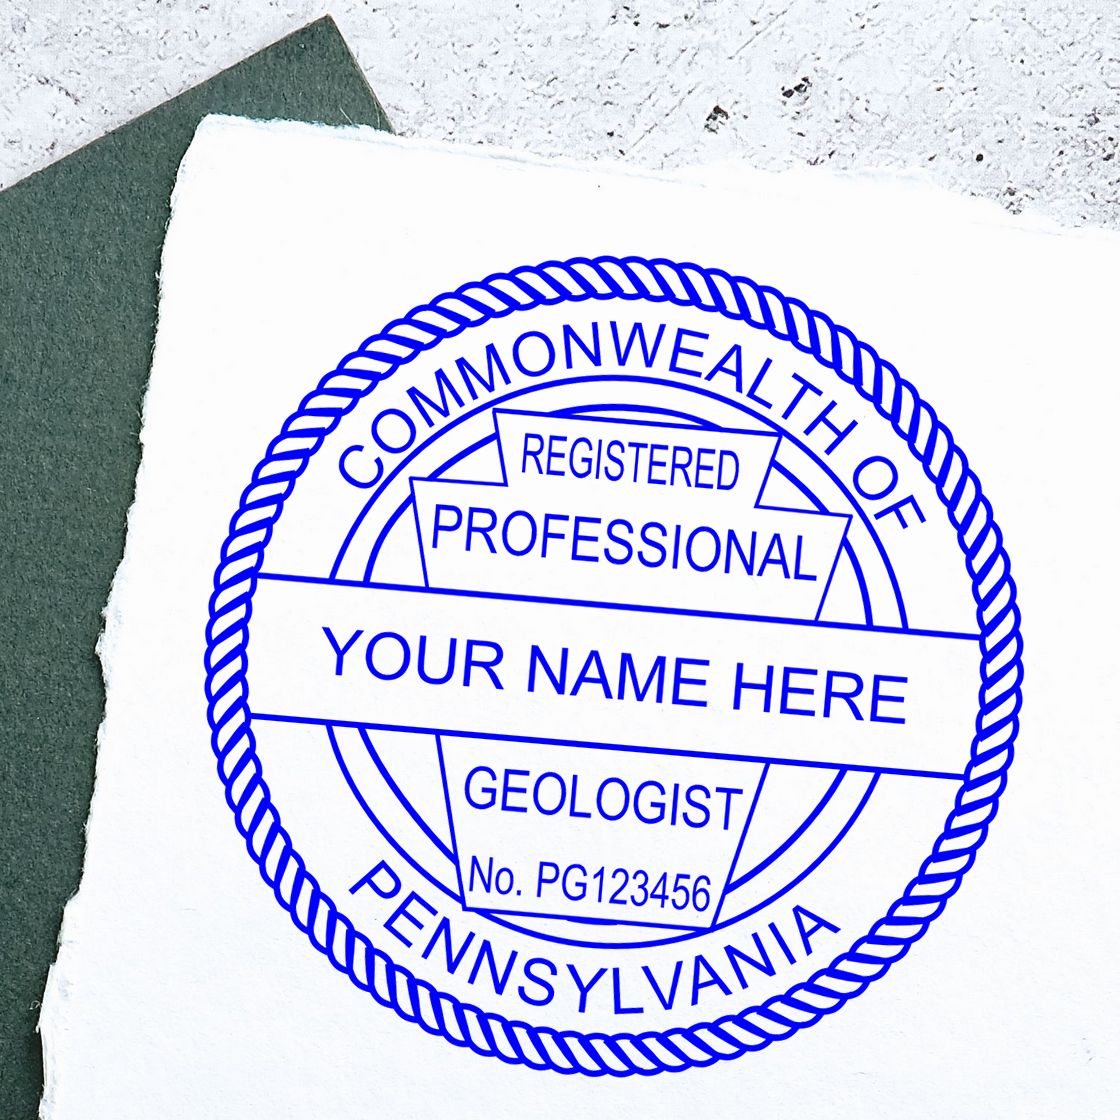 The Slim Pre-Inked Pennsylvania Professional Geologist Seal Stamp stamp impression comes to life with a crisp, detailed image stamped on paper - showcasing true professional quality.